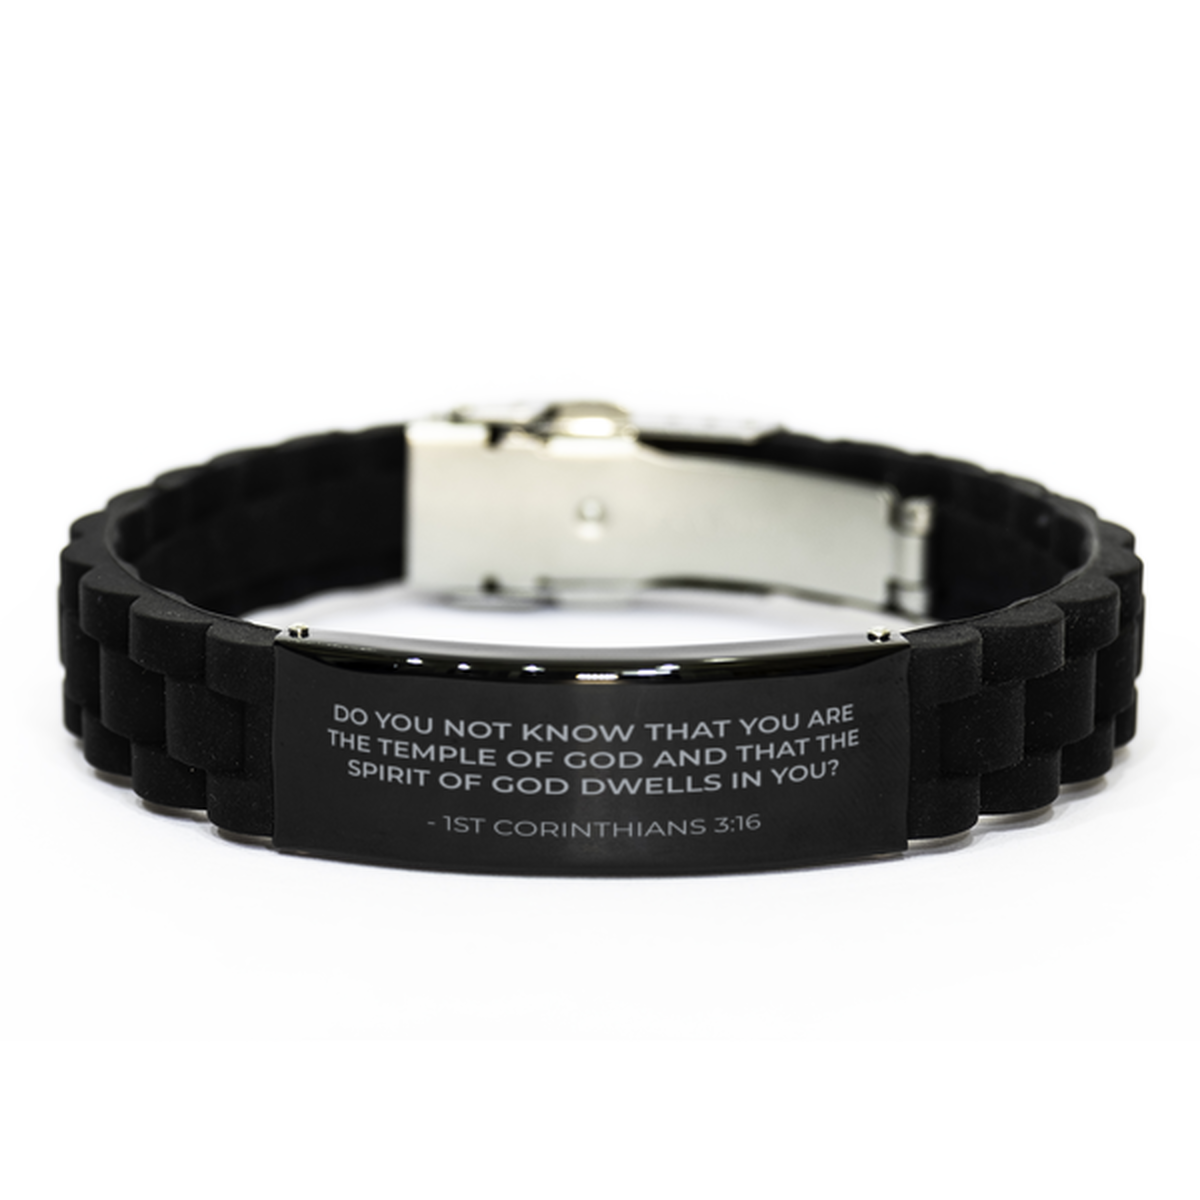 Bible Verse Black Bracelet,, 1St Corinthians 3:16 Do You Not Know That You Are The Temple Of God, Inspirational Christian Gifts For Men Women